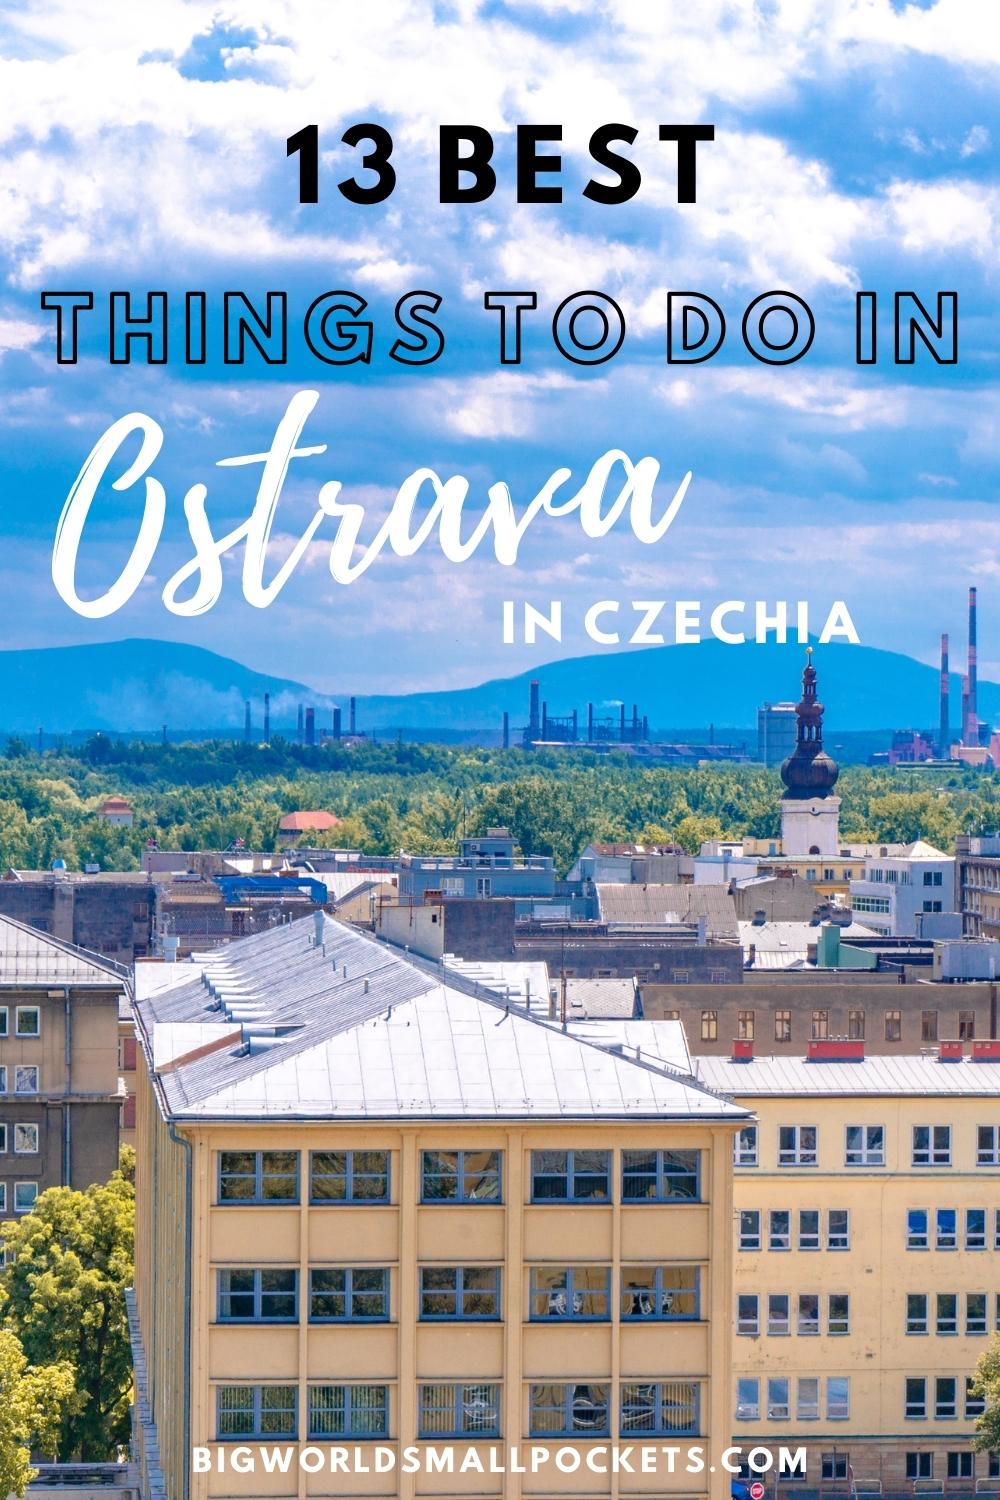 13 Best Things to Do in Ostrava in Czechia